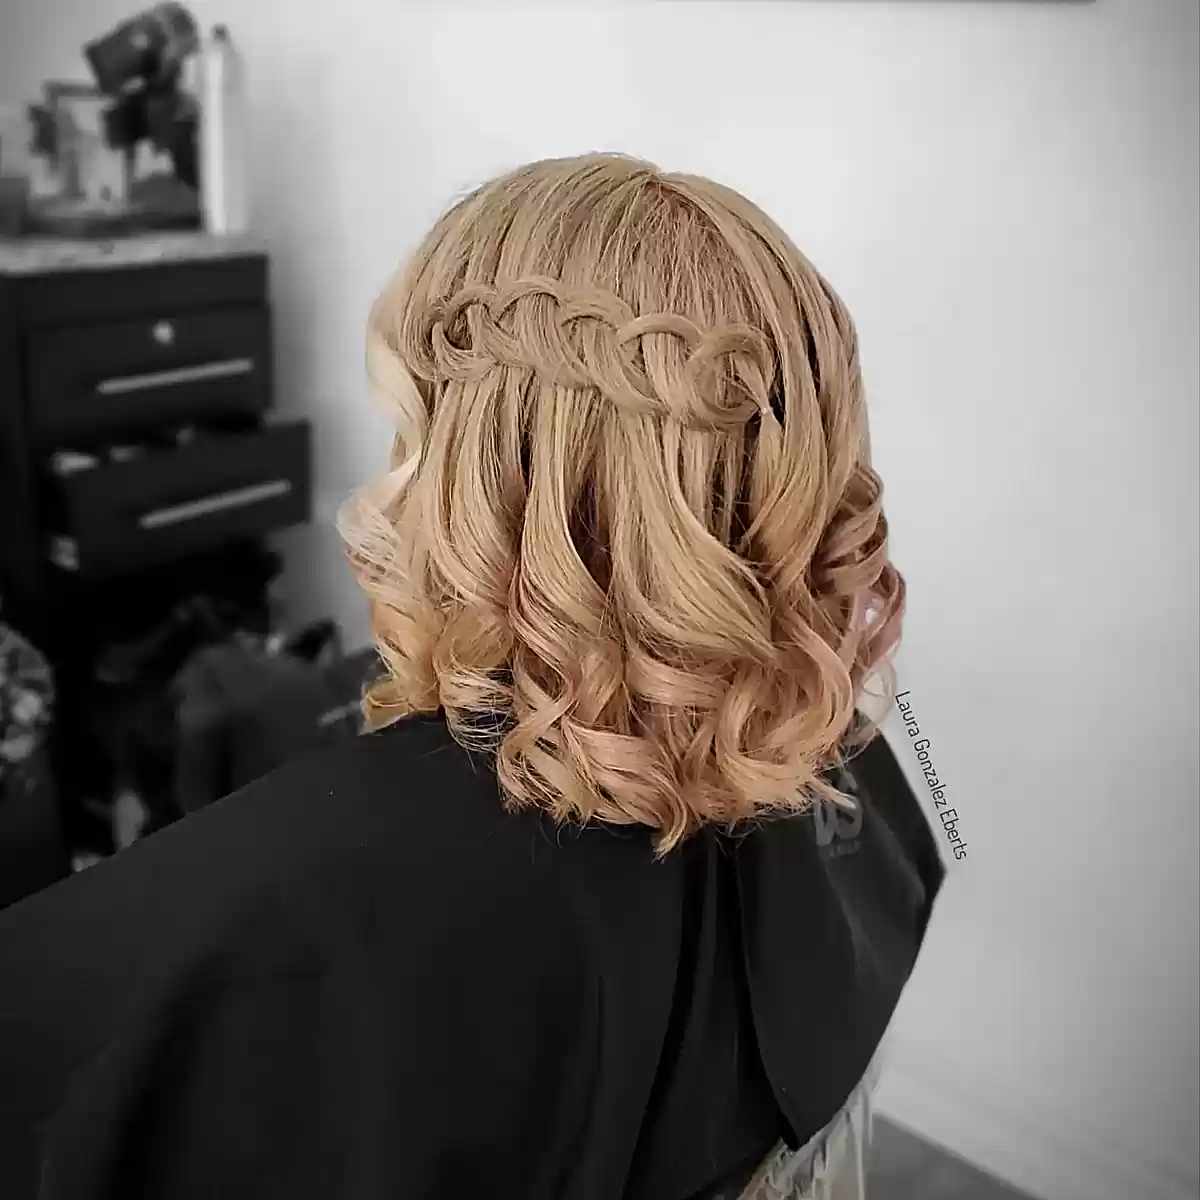 Short Chain Braided Style with Curled Ends for Prom Night